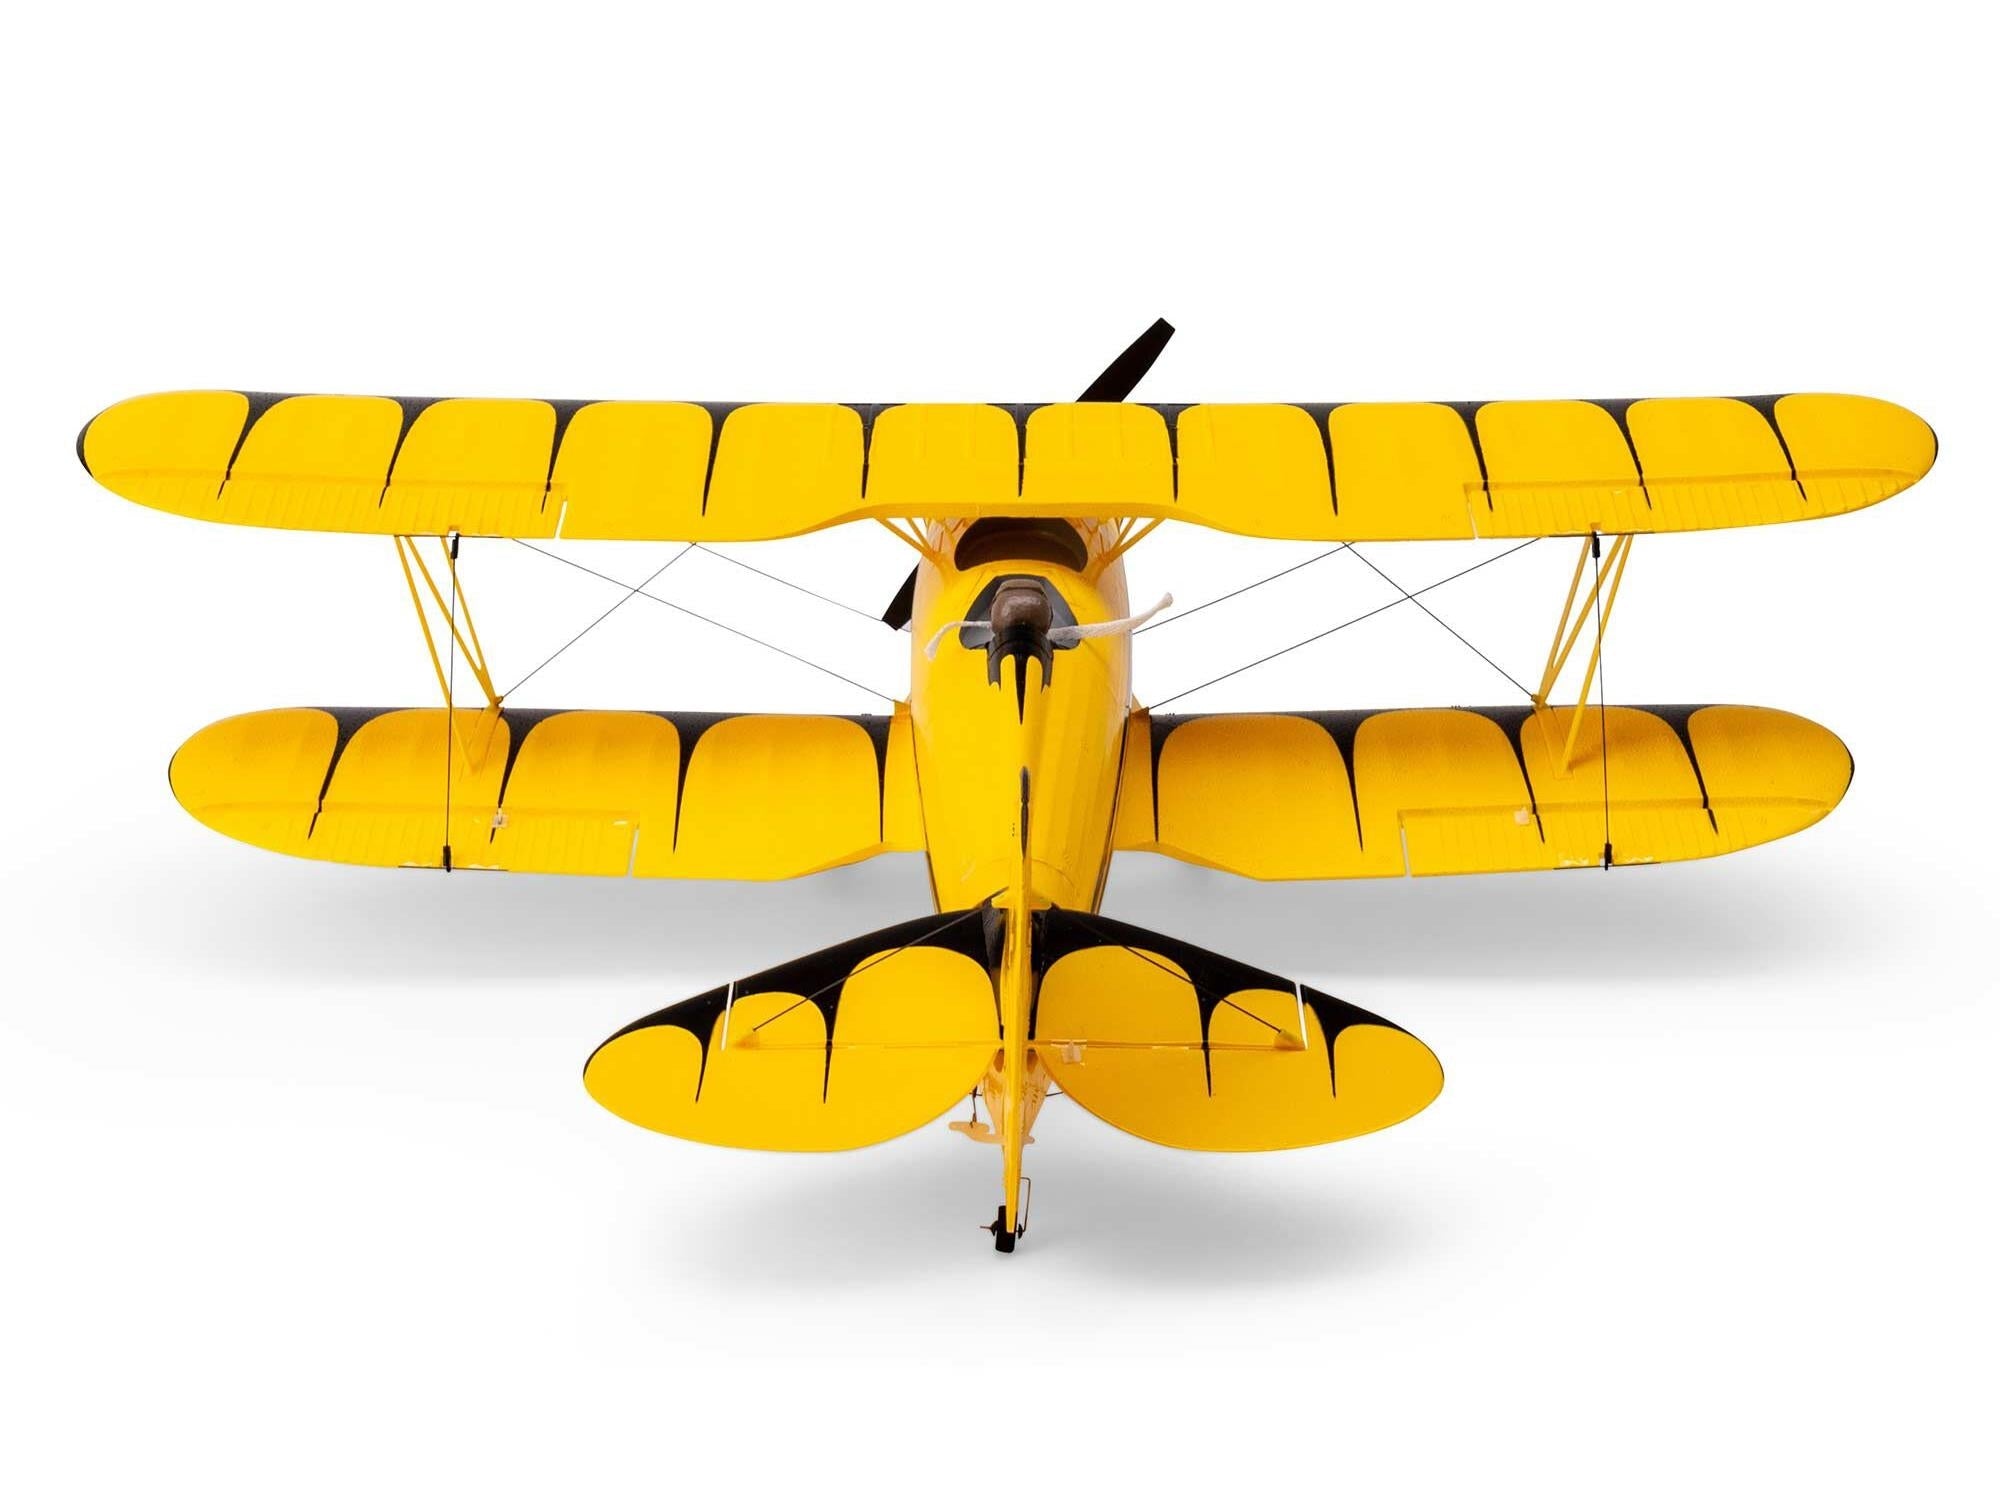 E-Flite UMX Waco BNF Basic with AS3X and SAFE Select - Yellow EFLU53550Y